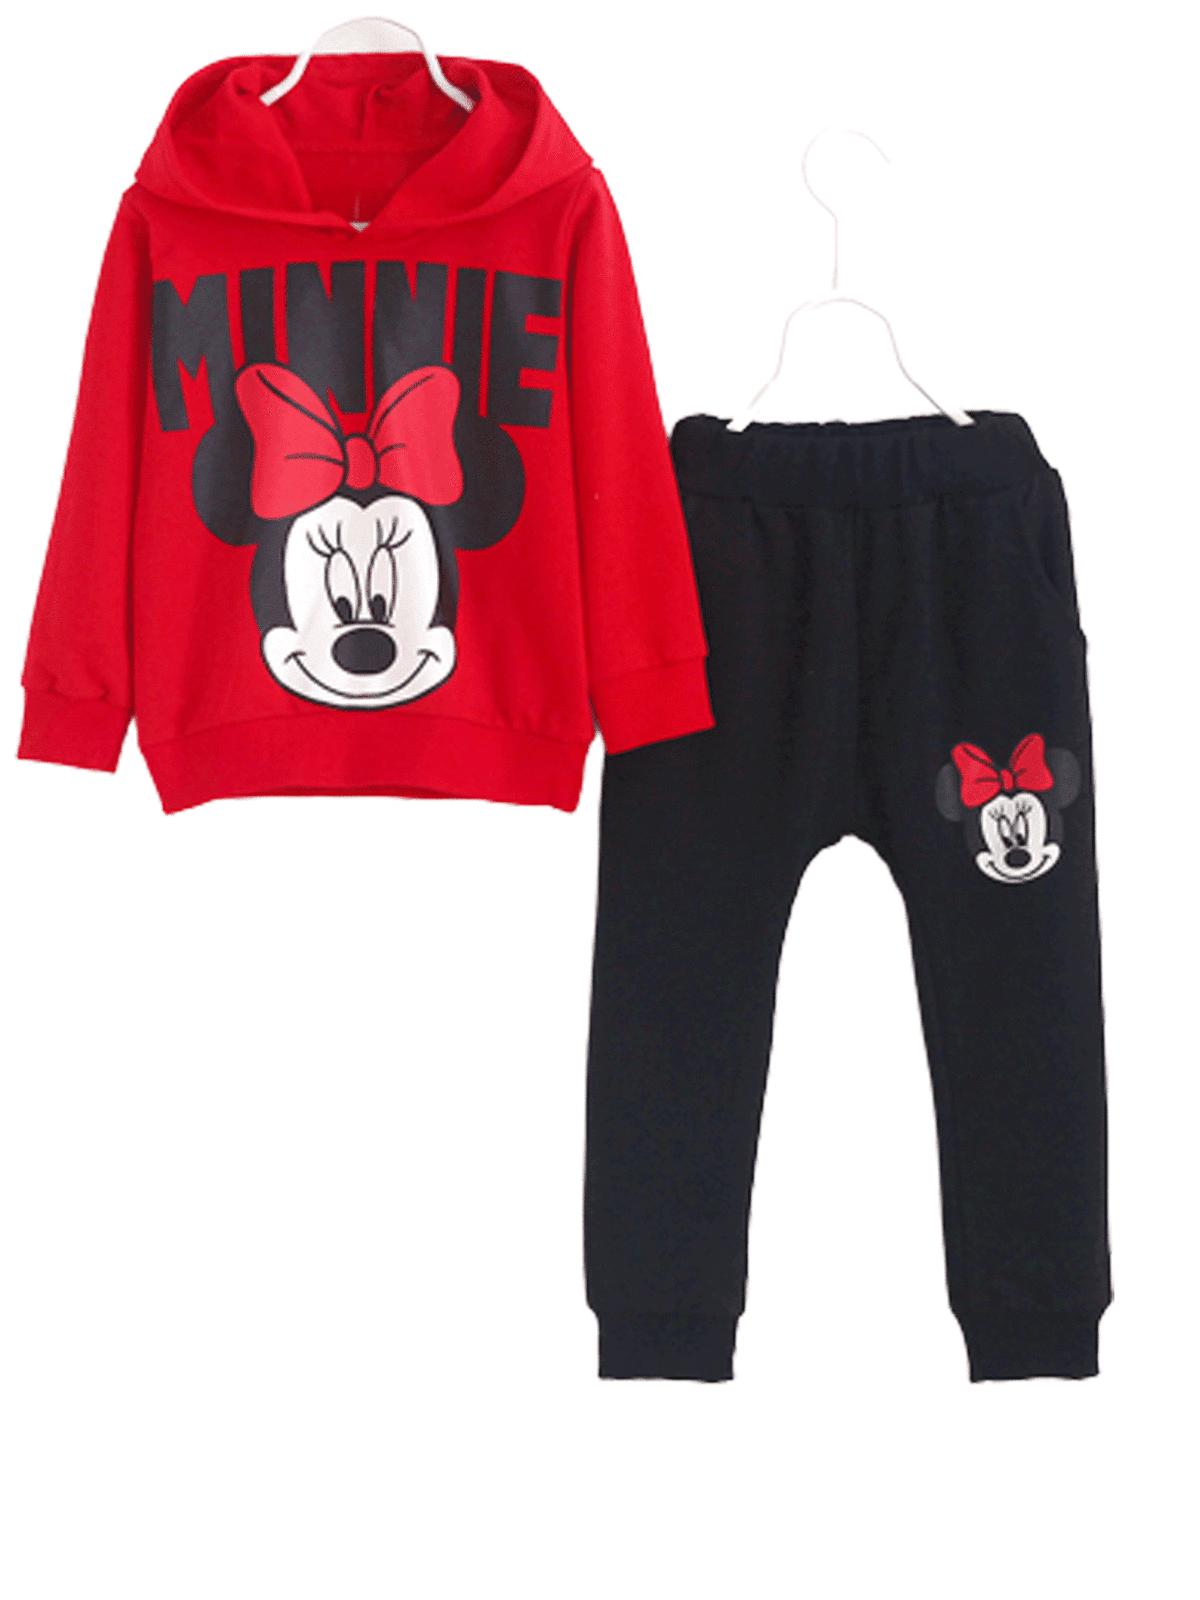 Kids Girls Minnie Mouse Clothes Sweatshirt Pullover Long Pants Tracksuit Outfit 